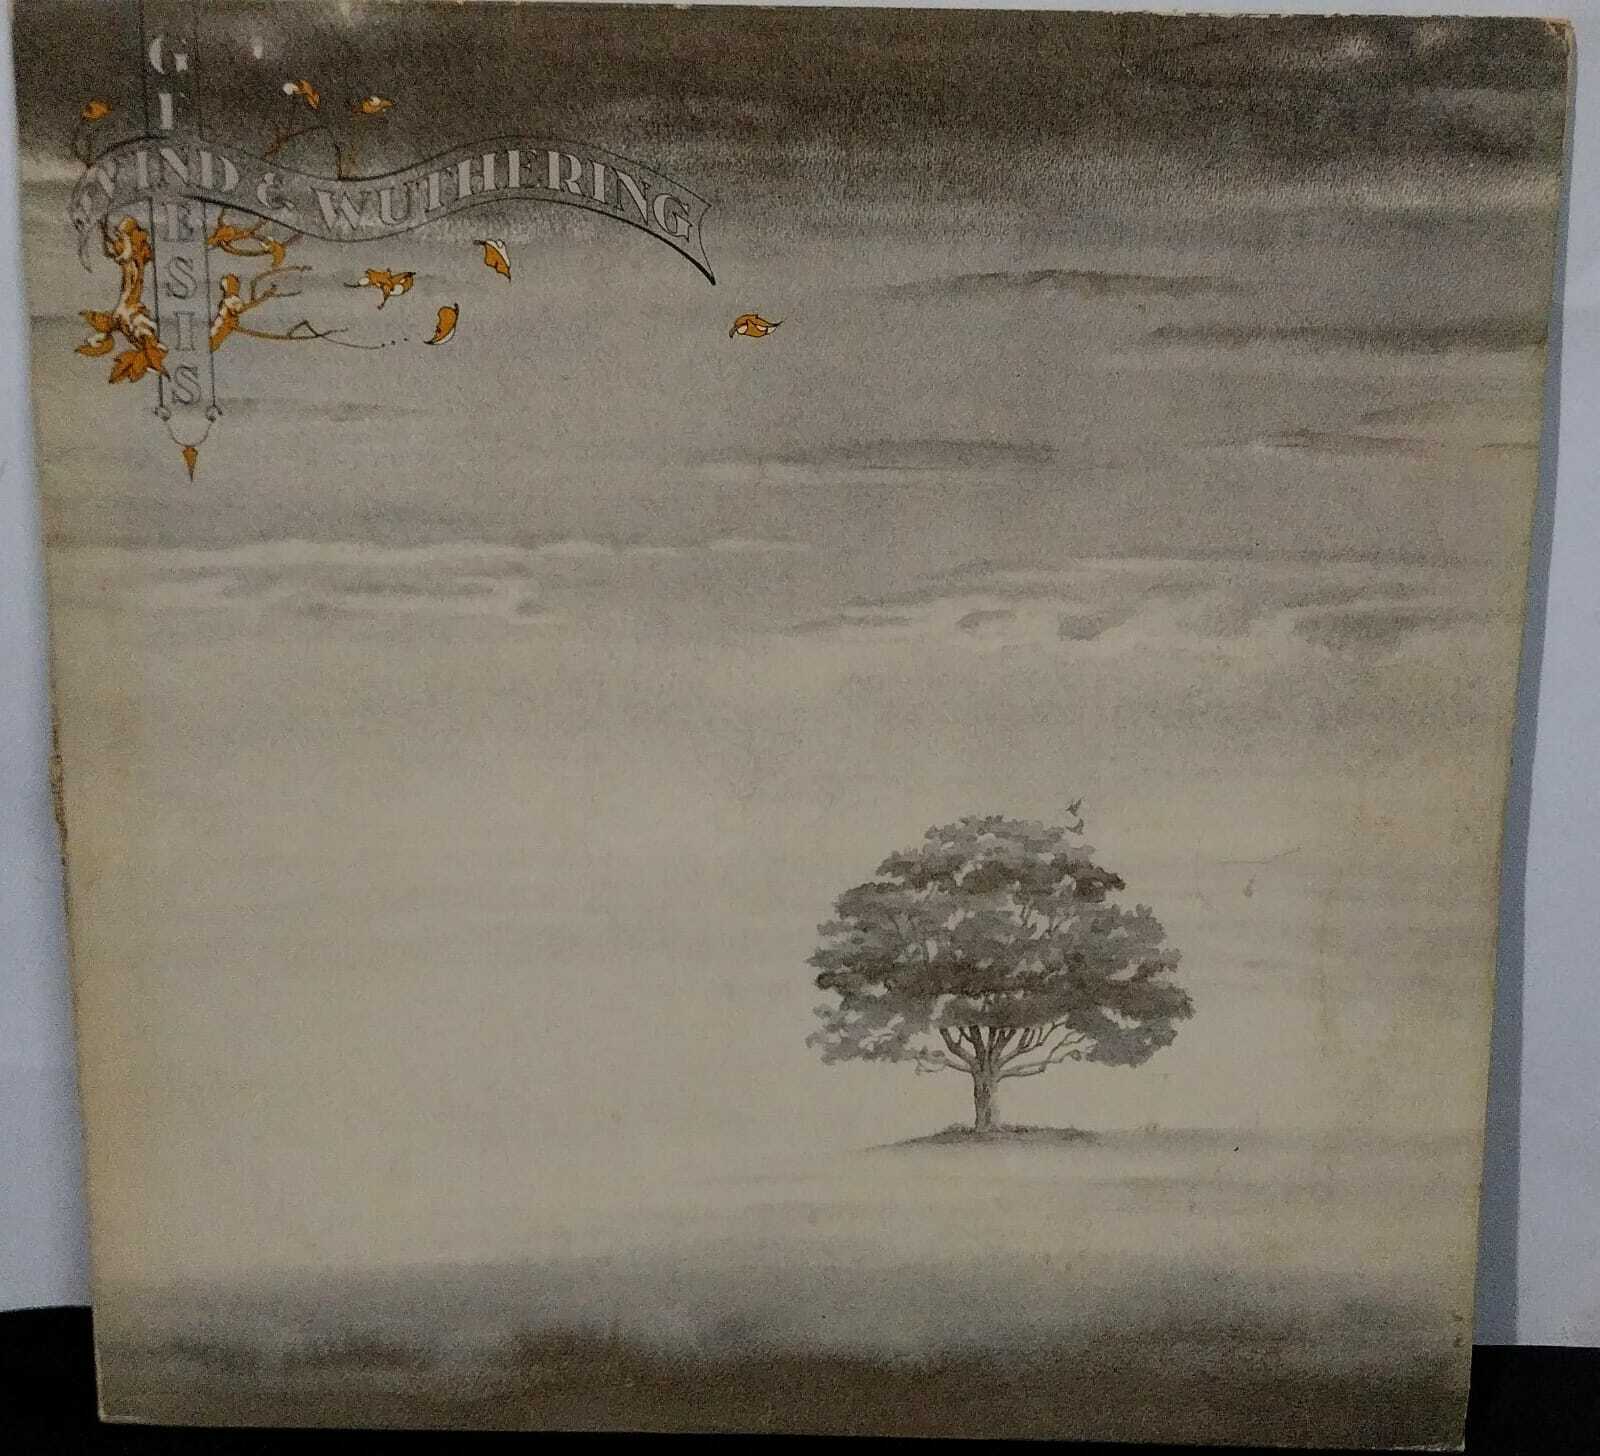 Vinil - Genesis - Wind and Wuthering